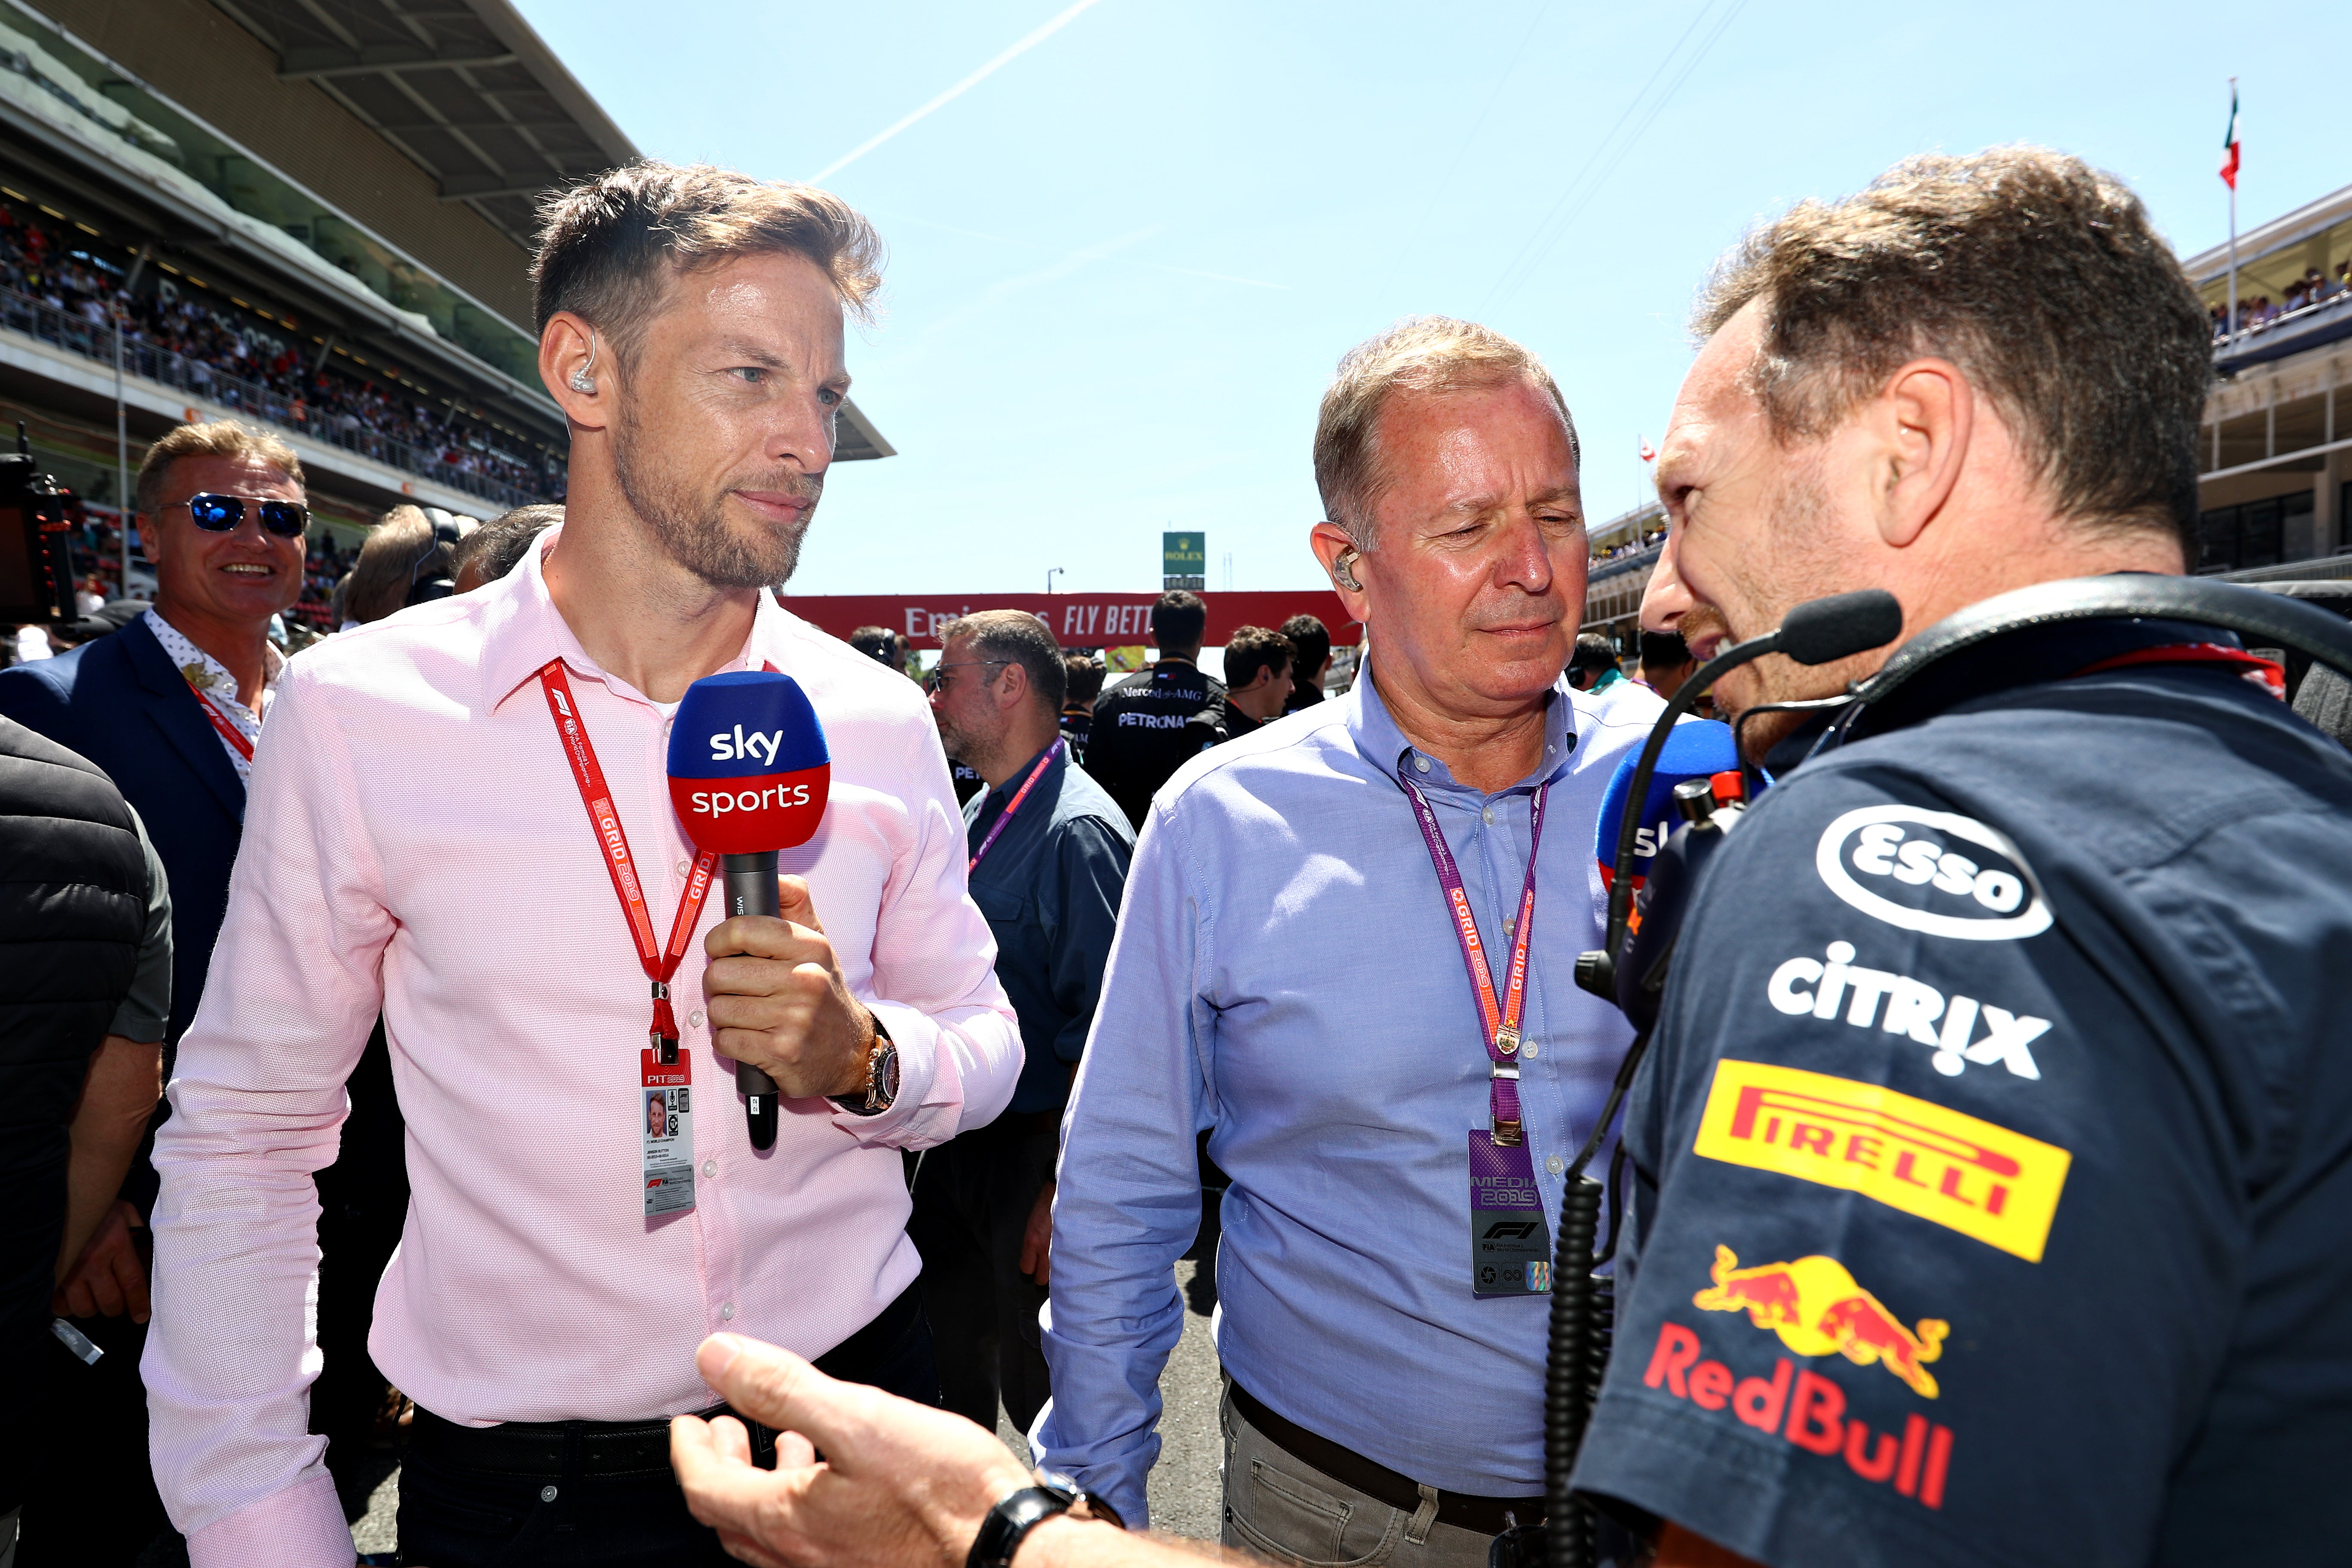 Martin Brundle, centre, and Jenson Button interviewing Christian Horner, right